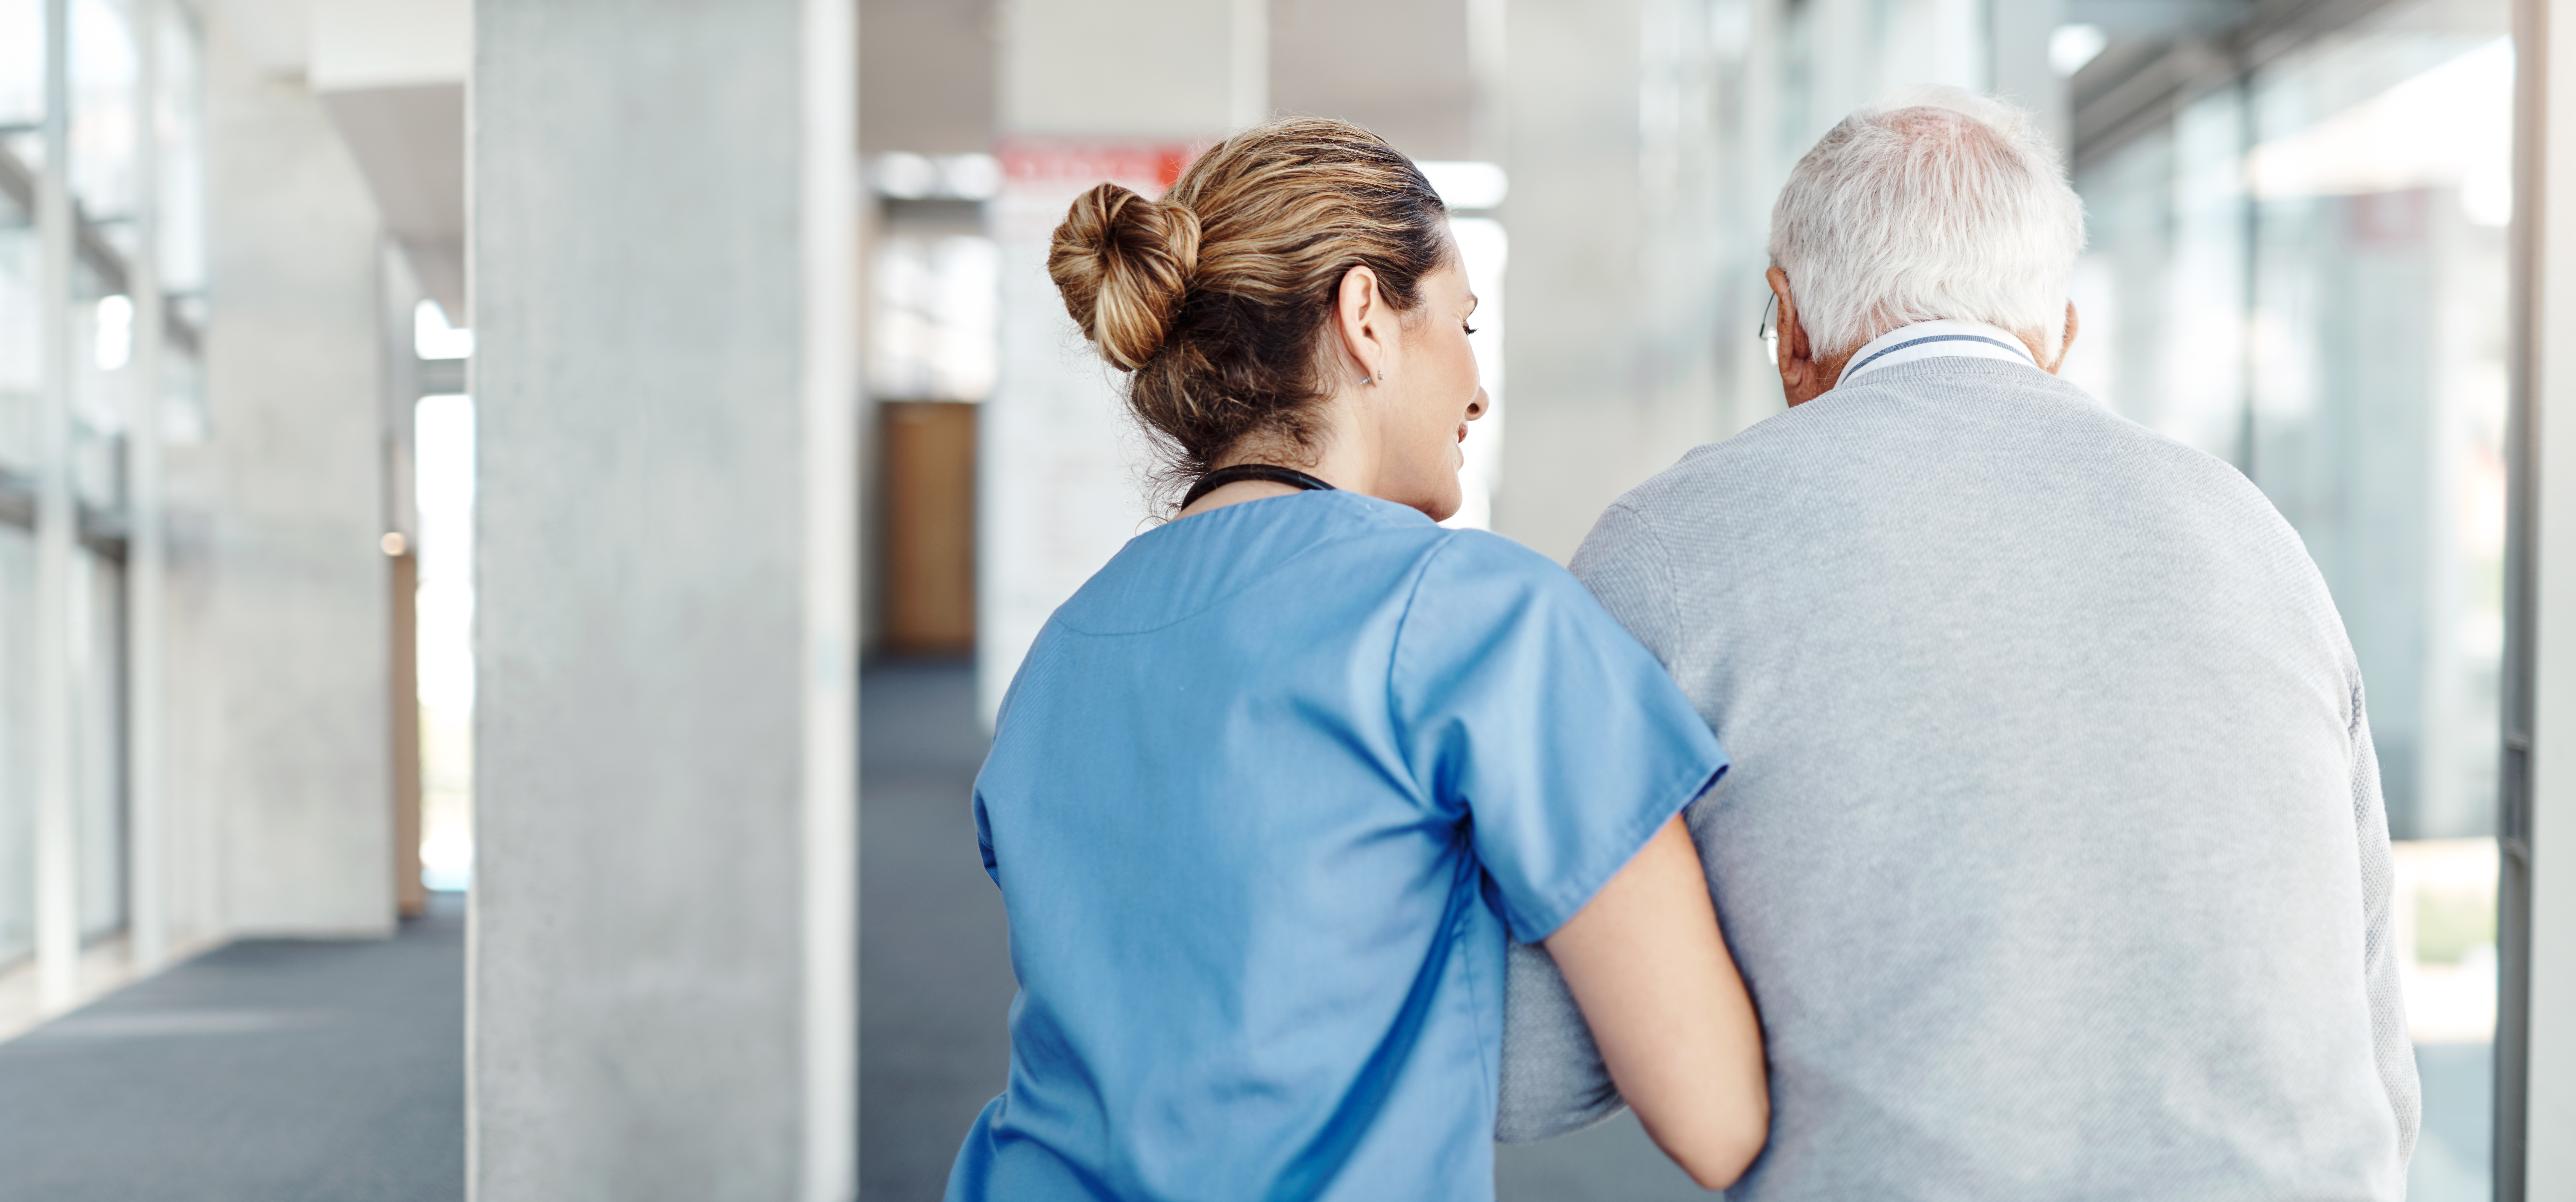 Workforce challenges for the aged care and disability sectors